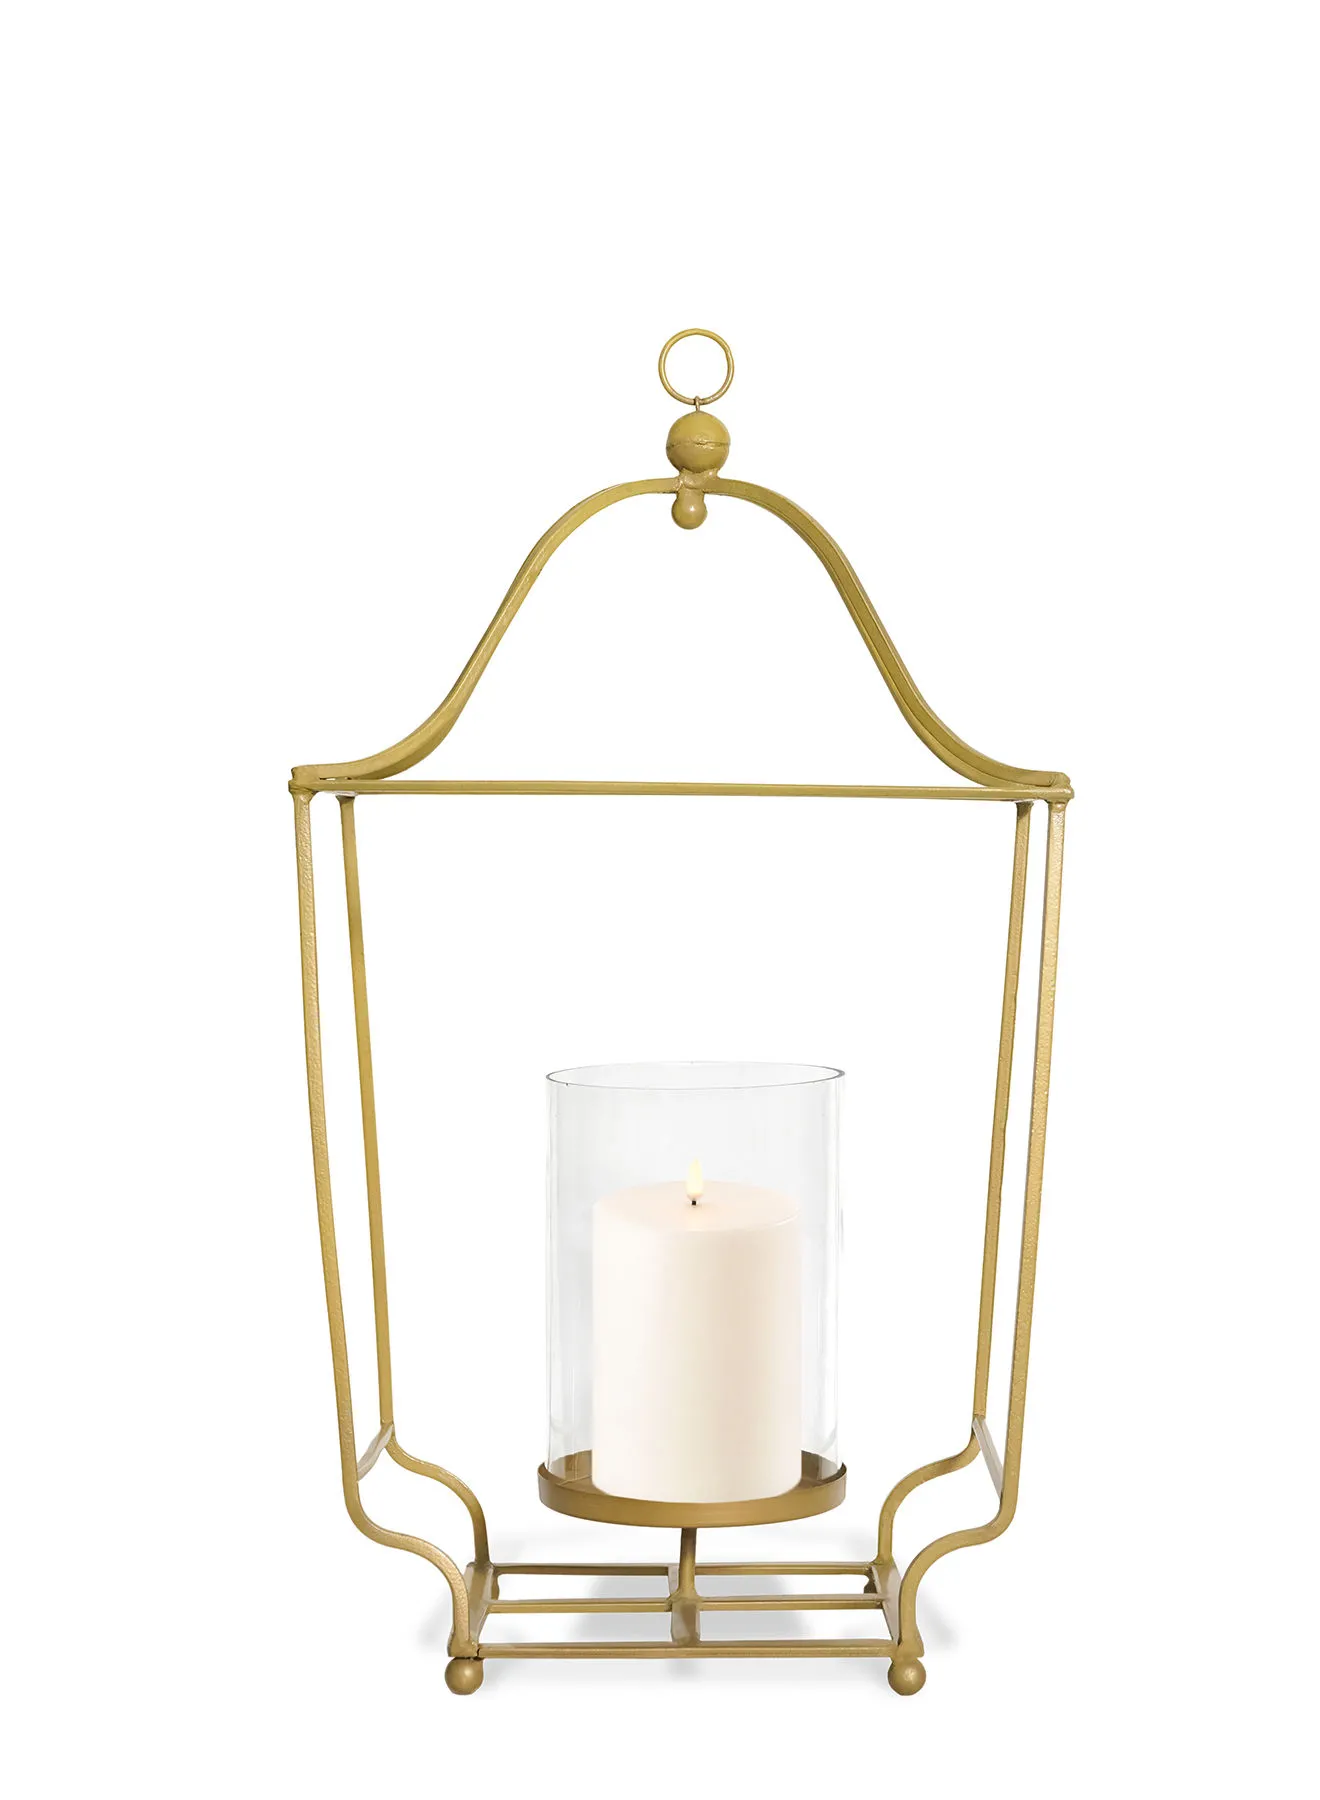 ebb & flow Modern Ideal Design Handmade Lantern  Unique Luxury Quality Scents For The Perfect Stylish Home Gold 20X19X54centimeter